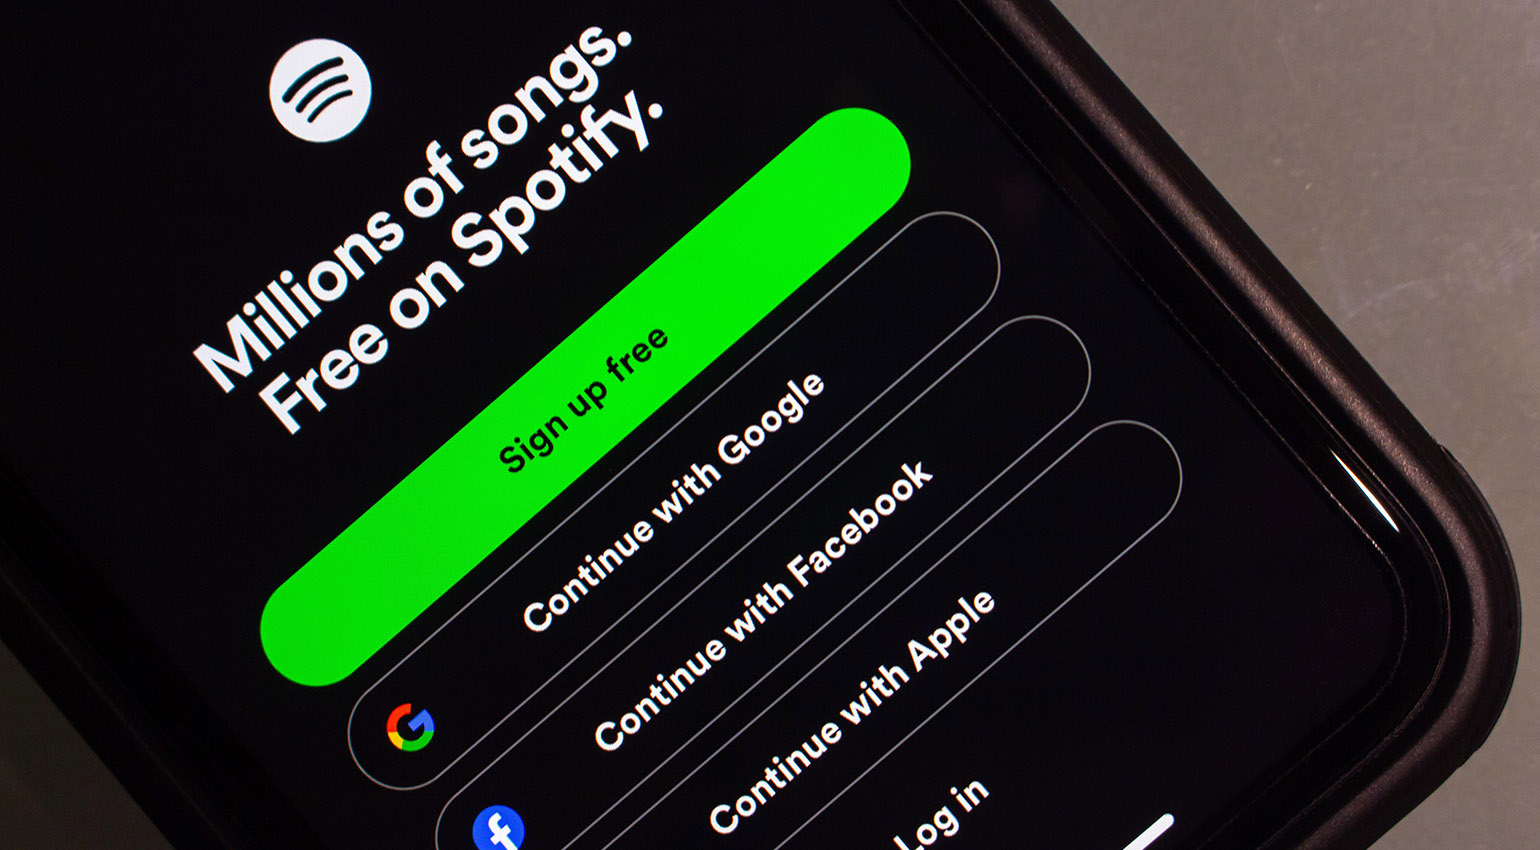 Artists Alert: 1M+ Manipulated Tracks on Streaming Sites like Spotify